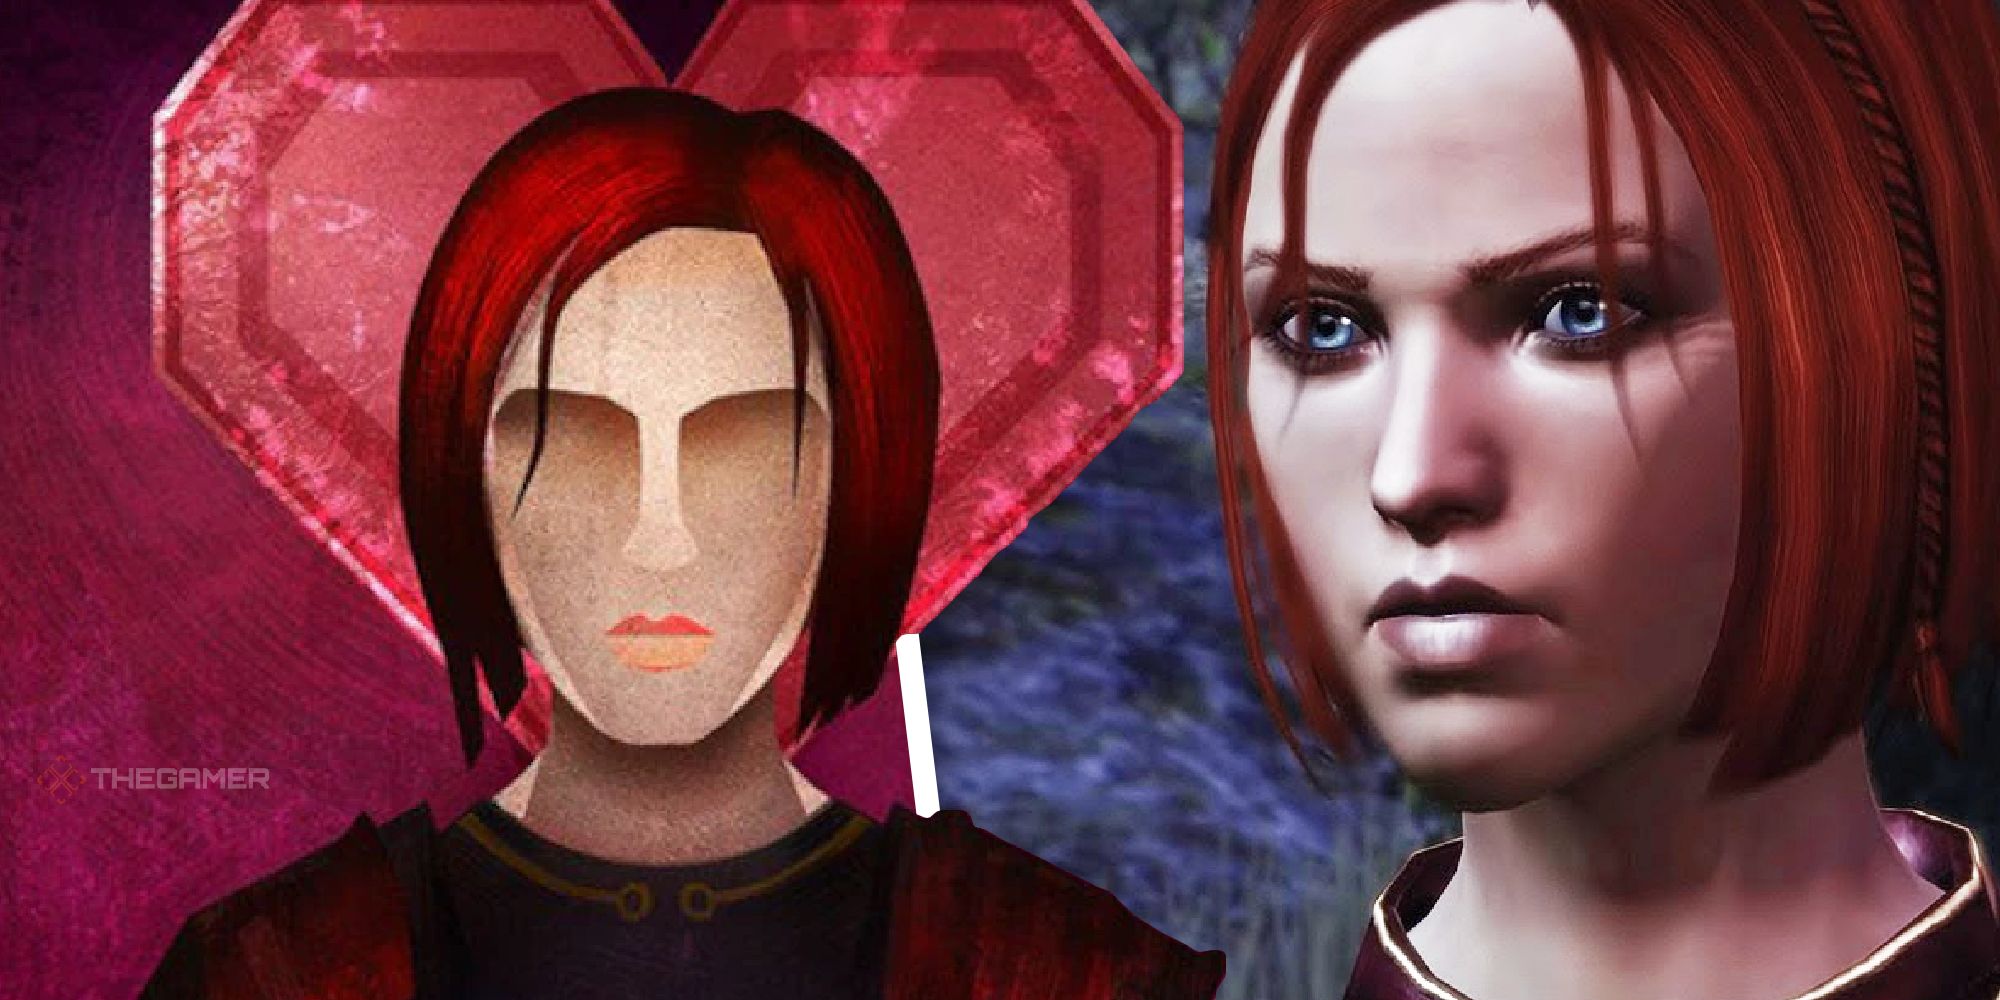 Dragon Age Origins gift guide: How to give gifts, locations & who